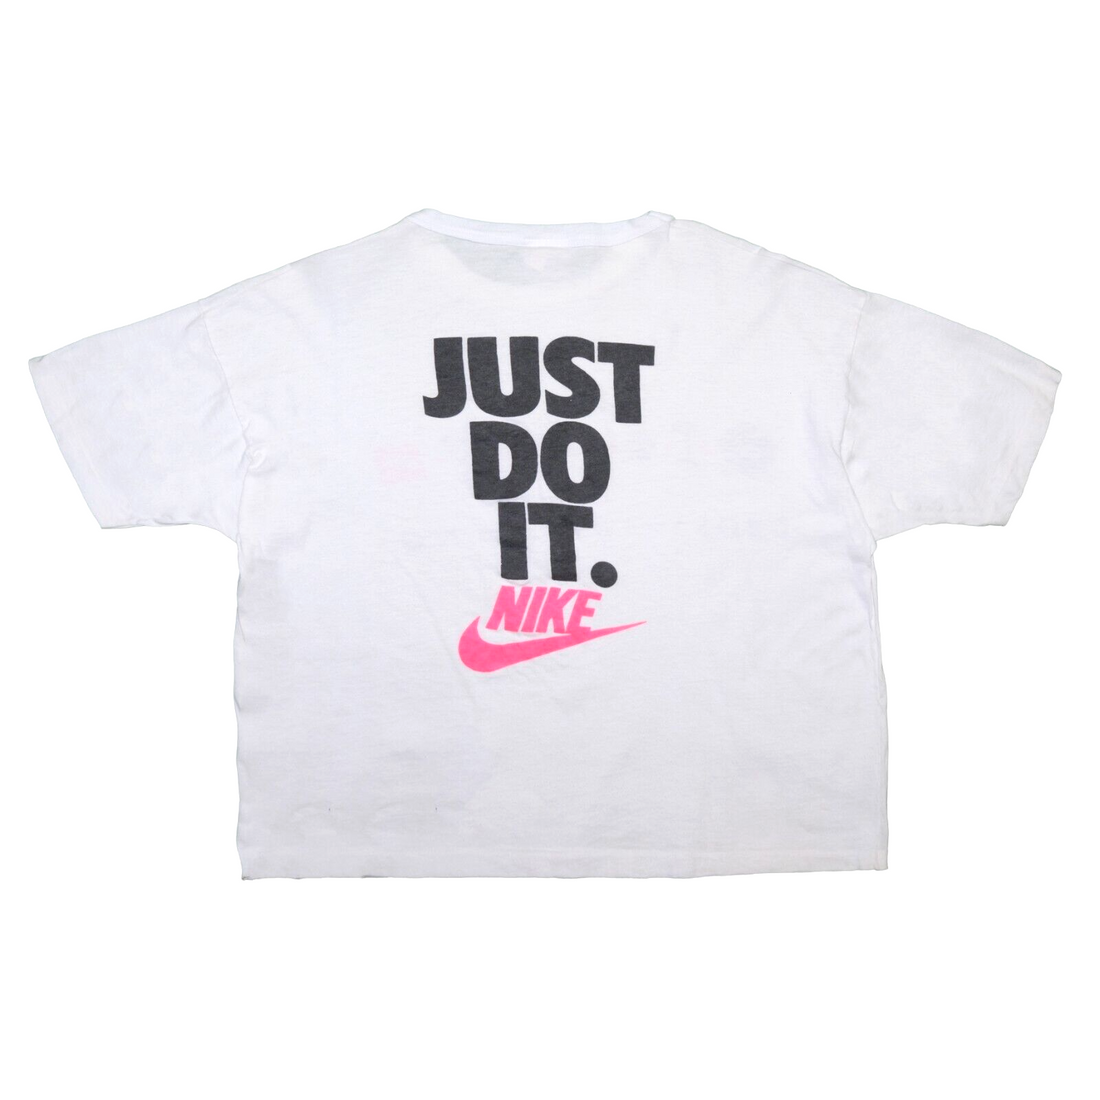 Vintage Nike Cross Training Just Do It T-Shirt Size Small 80s 90s Cropped